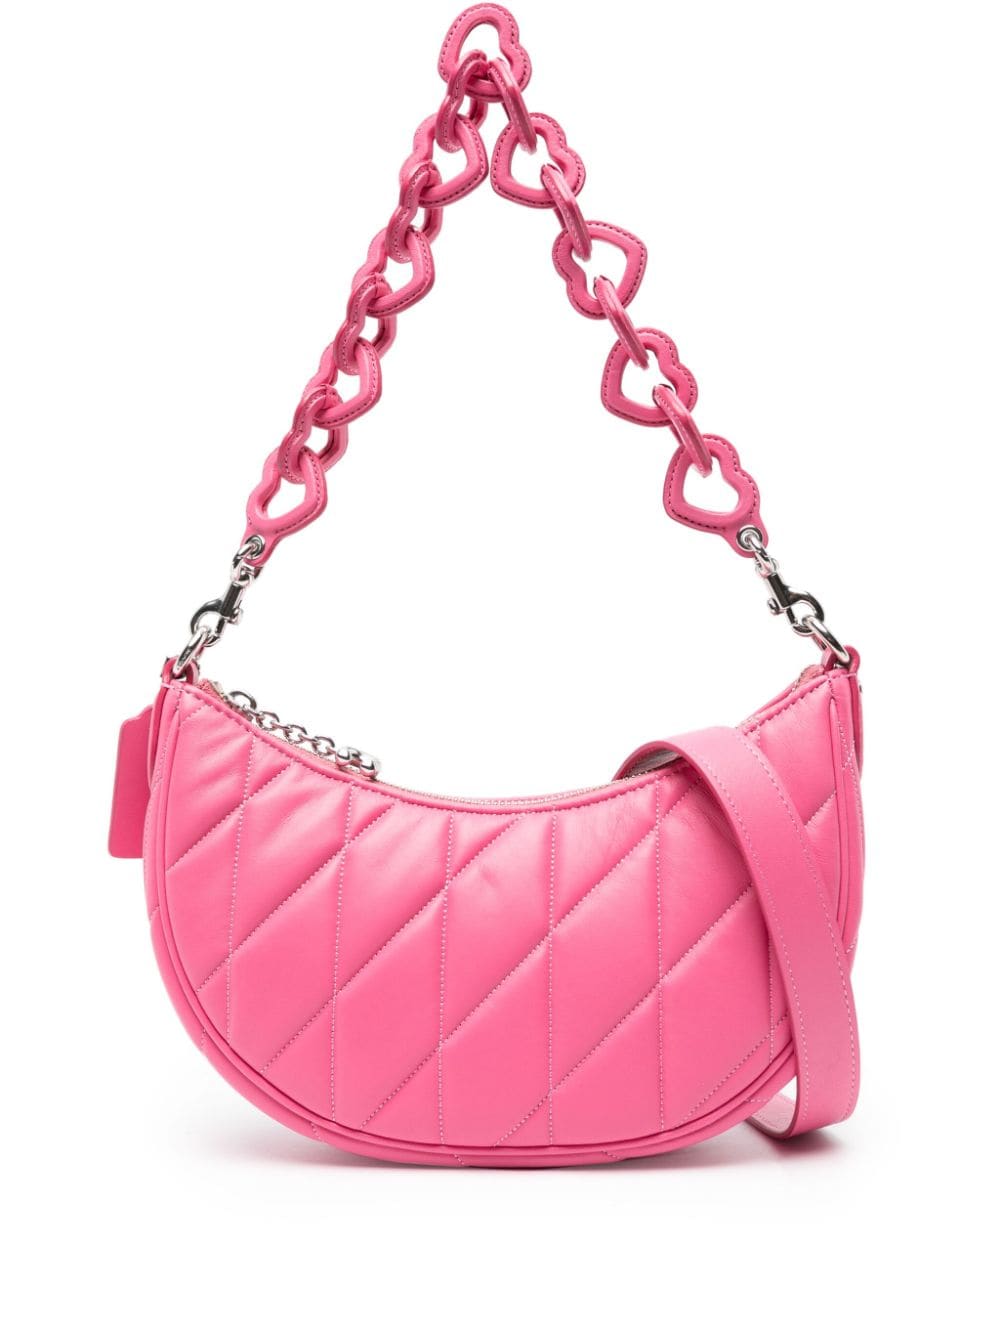 Coach Mira Quilted Leather Shoulder Bag - Pink